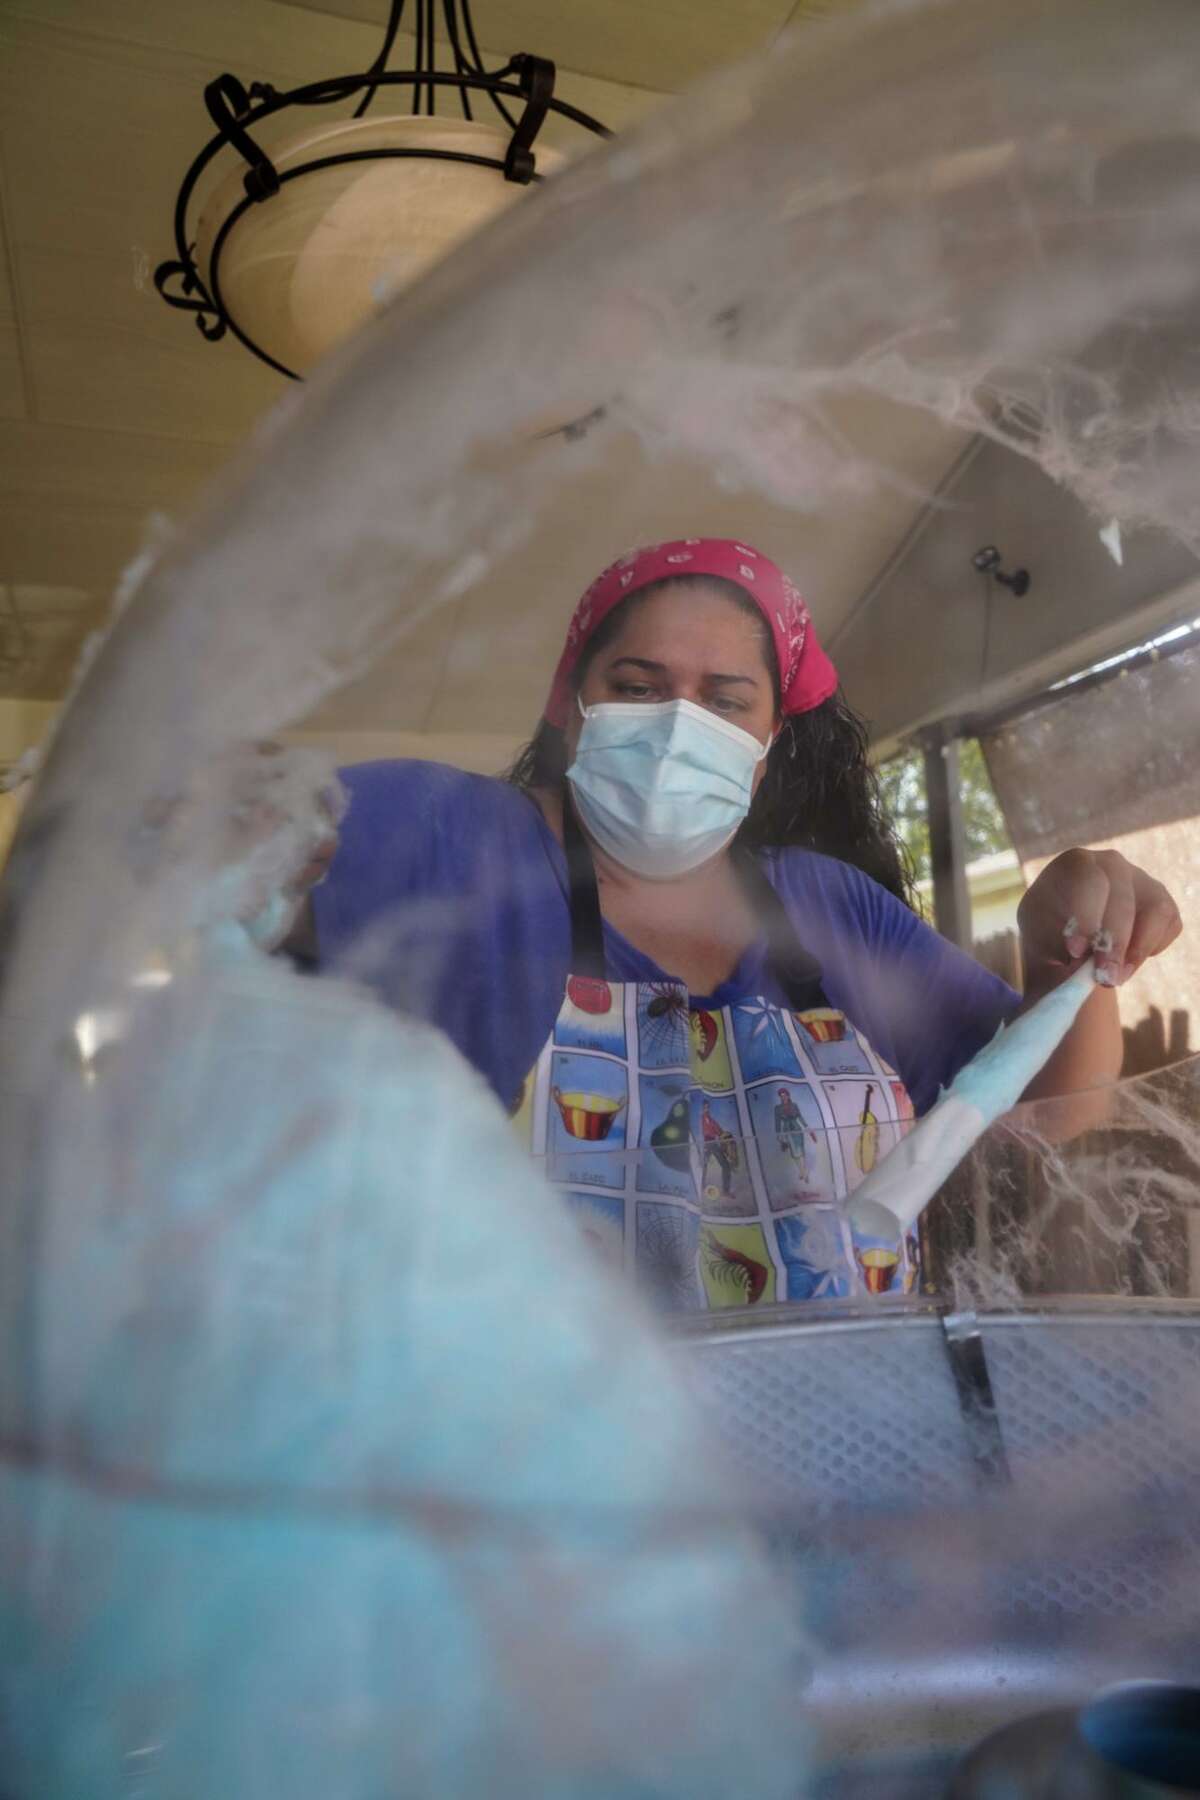 Angela Menchaca makes cotton candy during the annual Menchaca family Halloween tradition on the West Side. This Halloween, everyone involved has been vaccinated, will wear masks, and take a COVID test prior to the event.